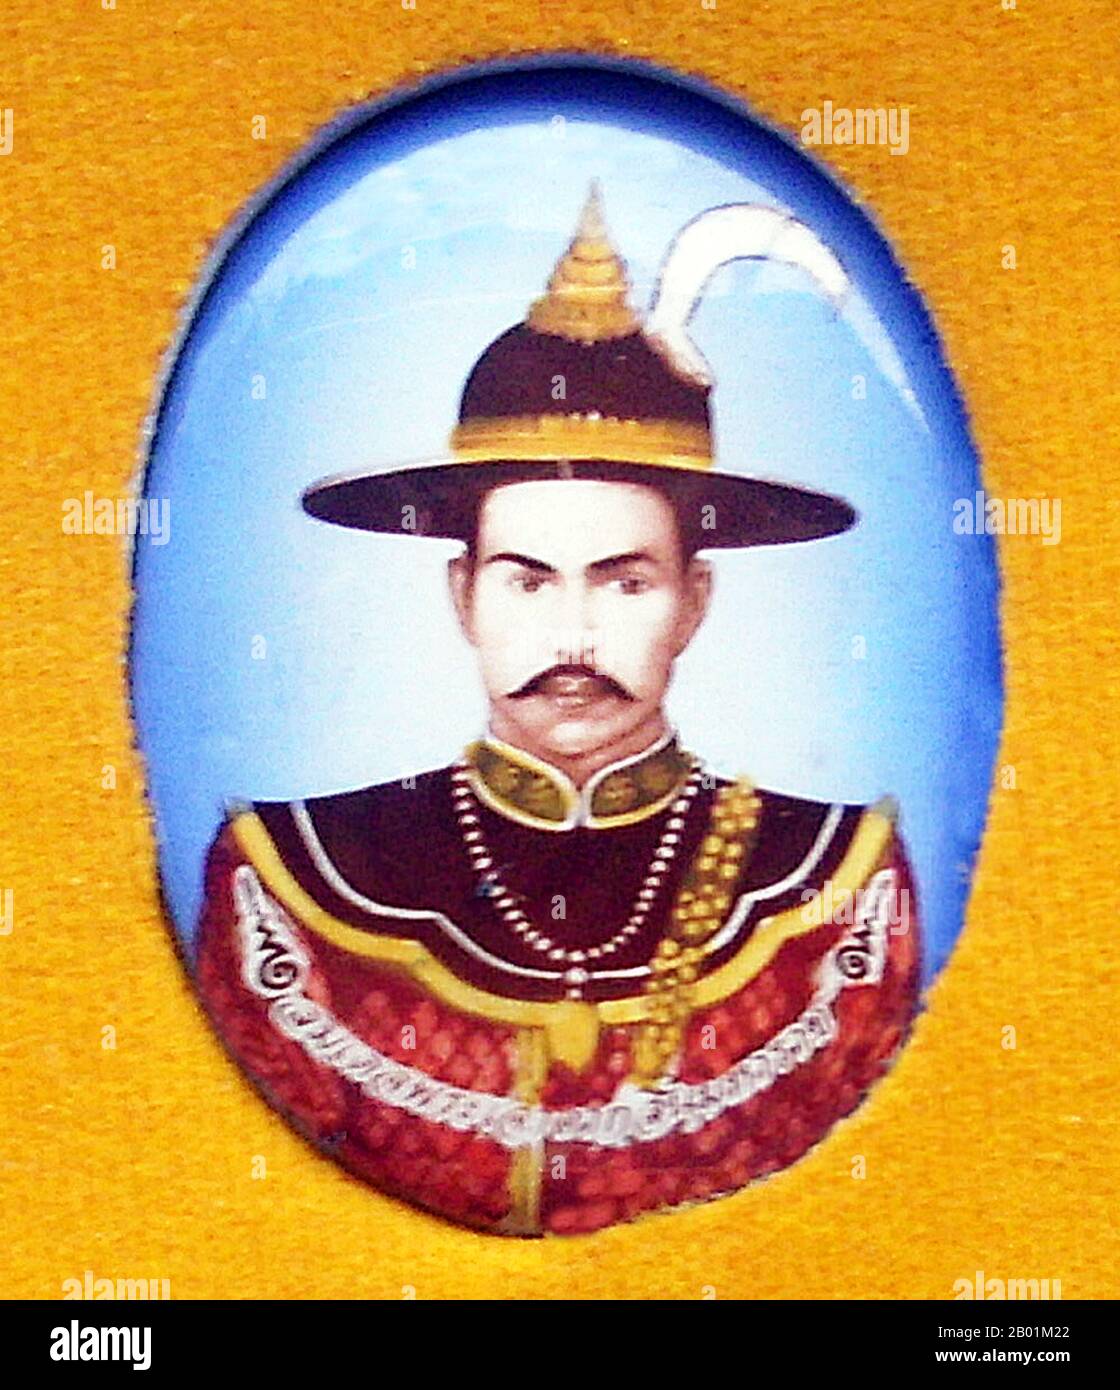 Thailand: King Taksin the Great (17 April 1734 - 7 April 1782), King of Siam (r. 1768-1782), represented on an amulet for sale at Sanam Luang, Bangkok, in 2010.  Taksin (Somdet Phra Chao Taksin Maharat) was the only King of the Thonburi Kingdom.  He is greatly revered by the Thai people for his leadership in liberating Siam from Burmese occupation after the Second Fall of Ayutthaya in 1767, and the subsequent unification of Siam after it fell under various warlords. He established the city Thonburi as the new capital, as the city Ayutthaya had been almost completely destroyed by the invaders. Stock Photo